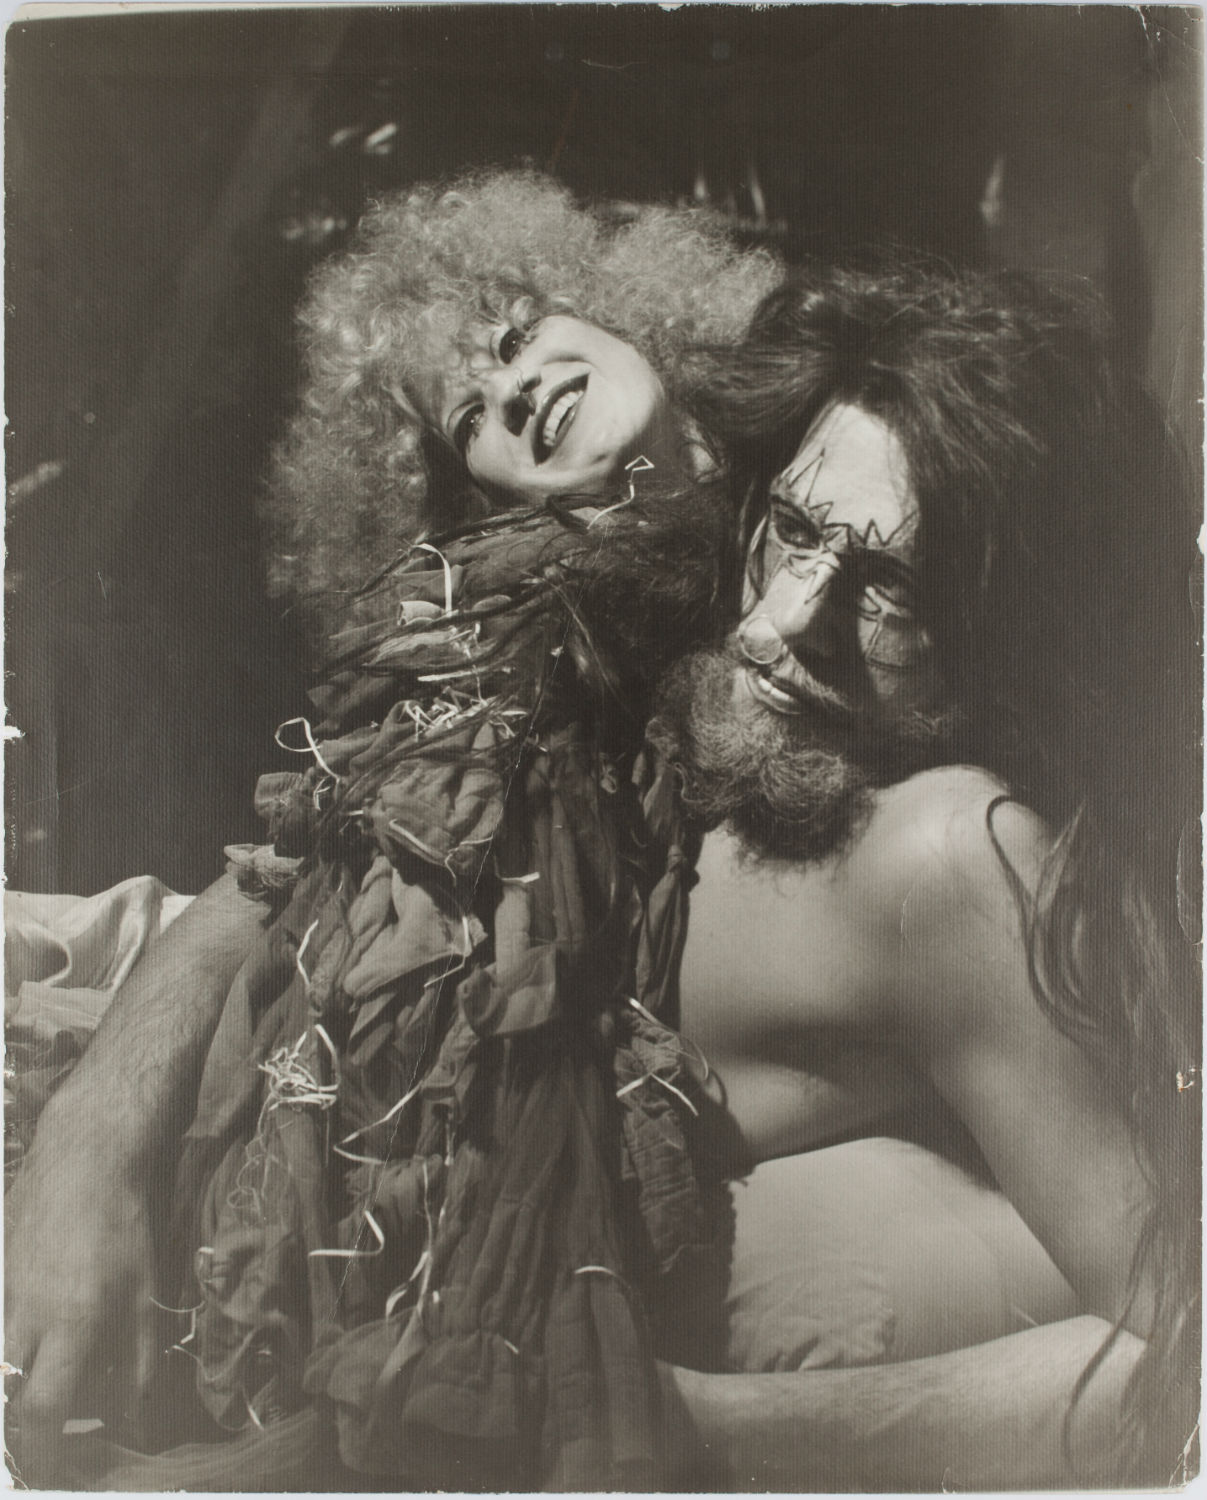 Angels of Light: Portrait of Debra Bauer and Rodney Price, early 1970s; photograph; 20 x 16 in.; courtesy of Debra Bauer.